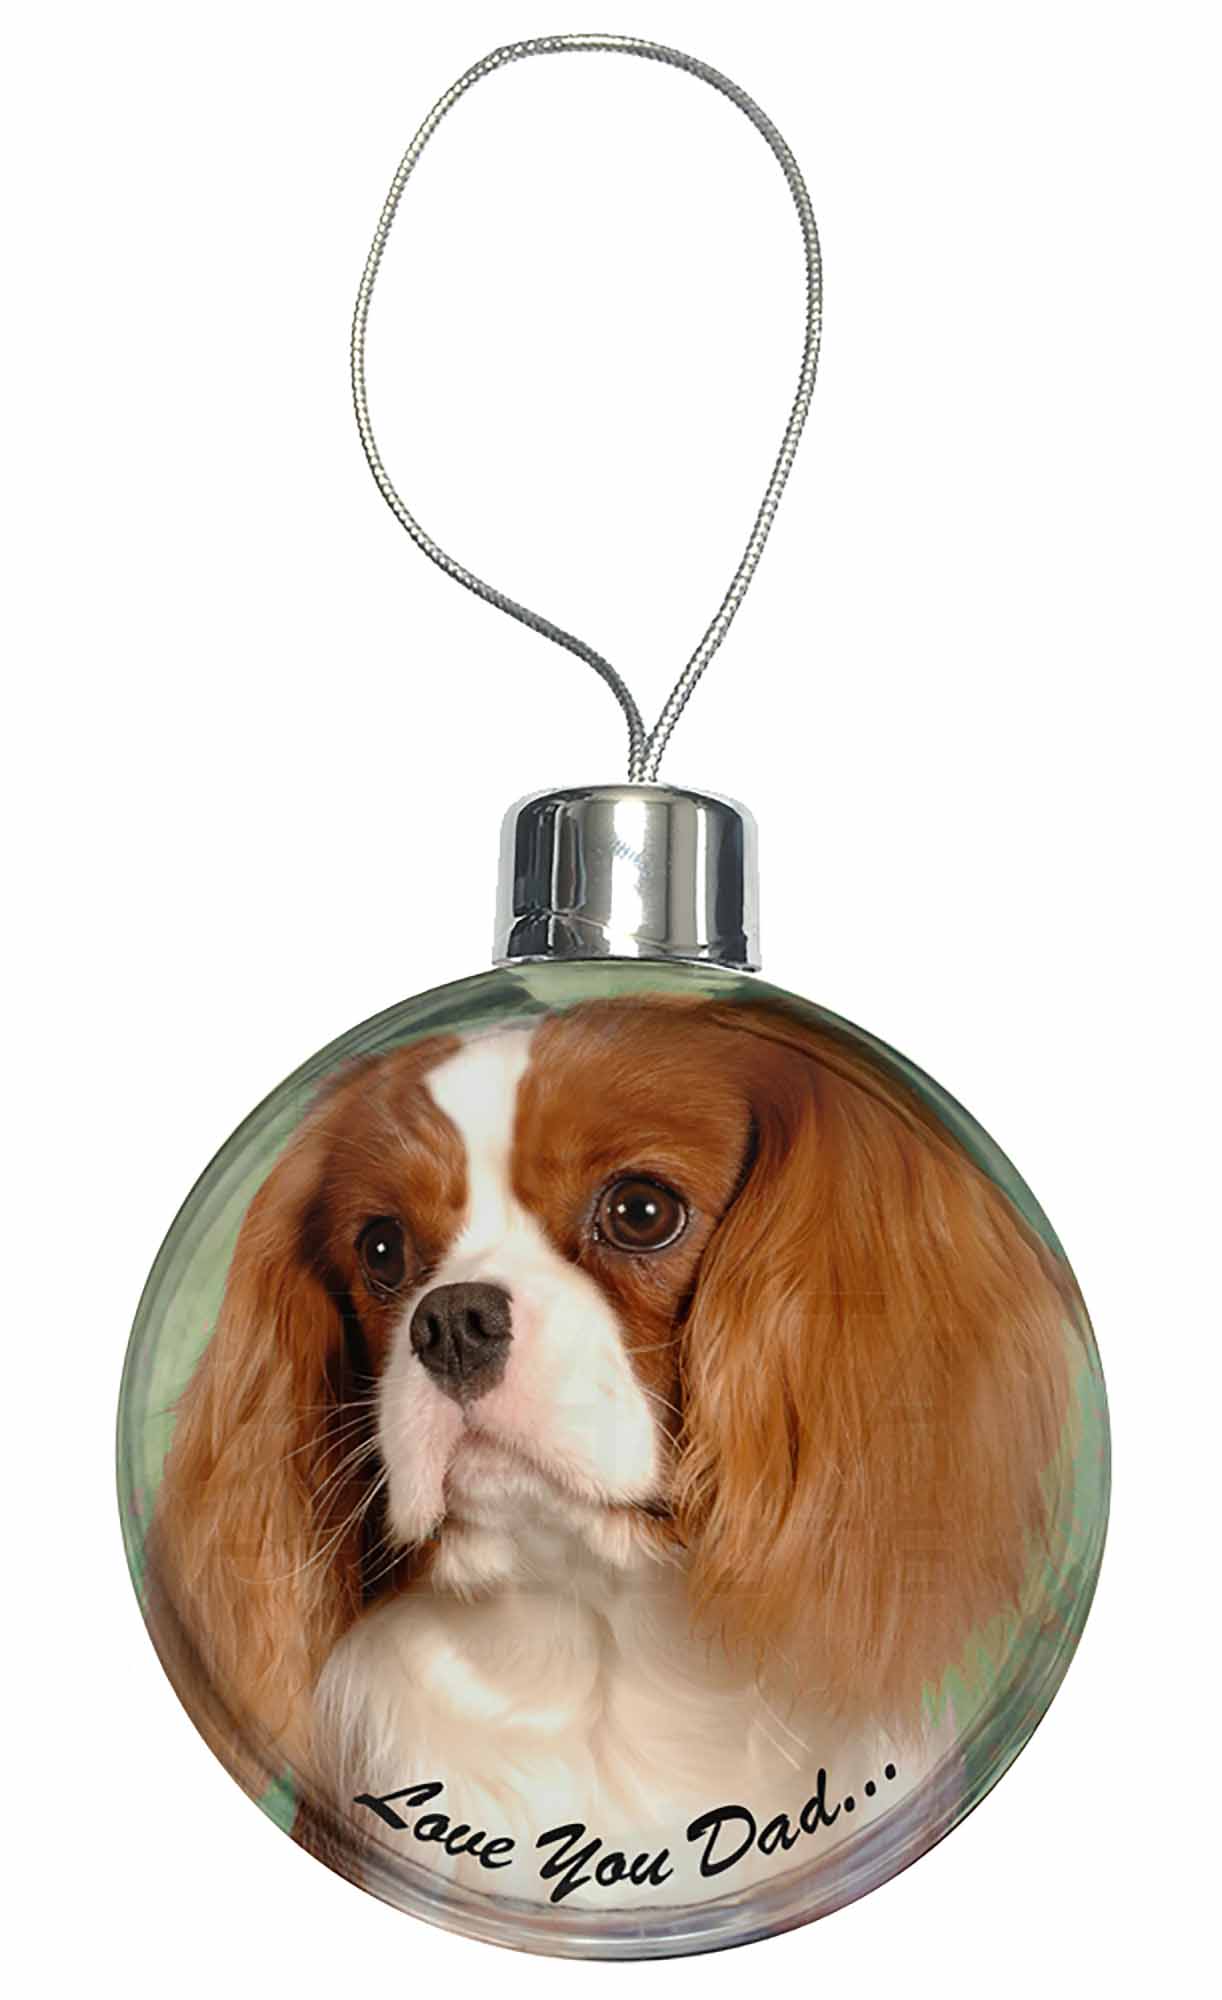 decoration crystal pen holder with dog limited edition souvenir Cavalier Collection